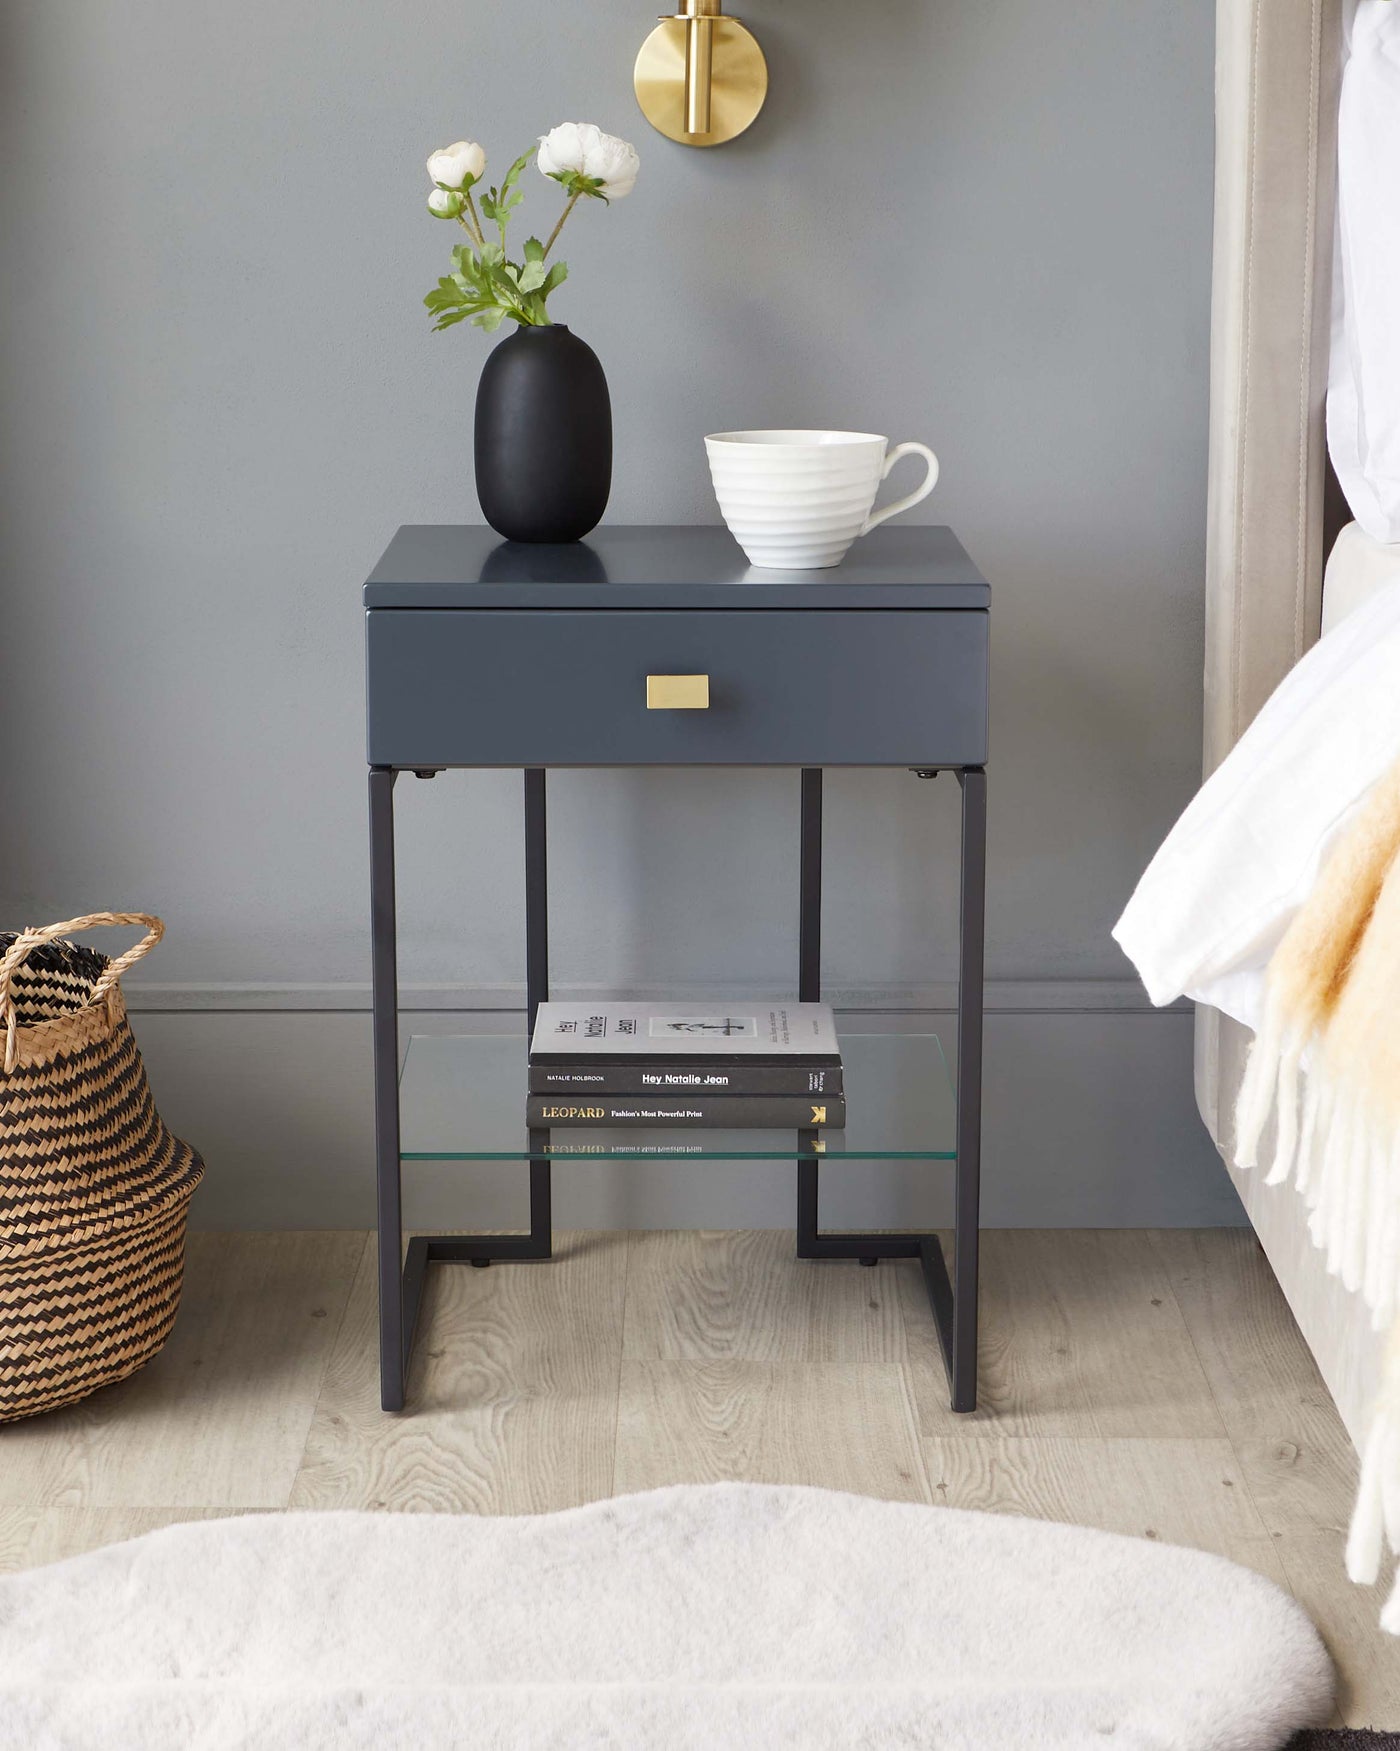 A modern dark grey nightstand with a single drawer, featuring a sleek brass handle and a lower shelf with a glass surface, supported by a minimalist metal frame. The nightstand is styled with a matte black vase holding white flowers and a white ceramic cup.